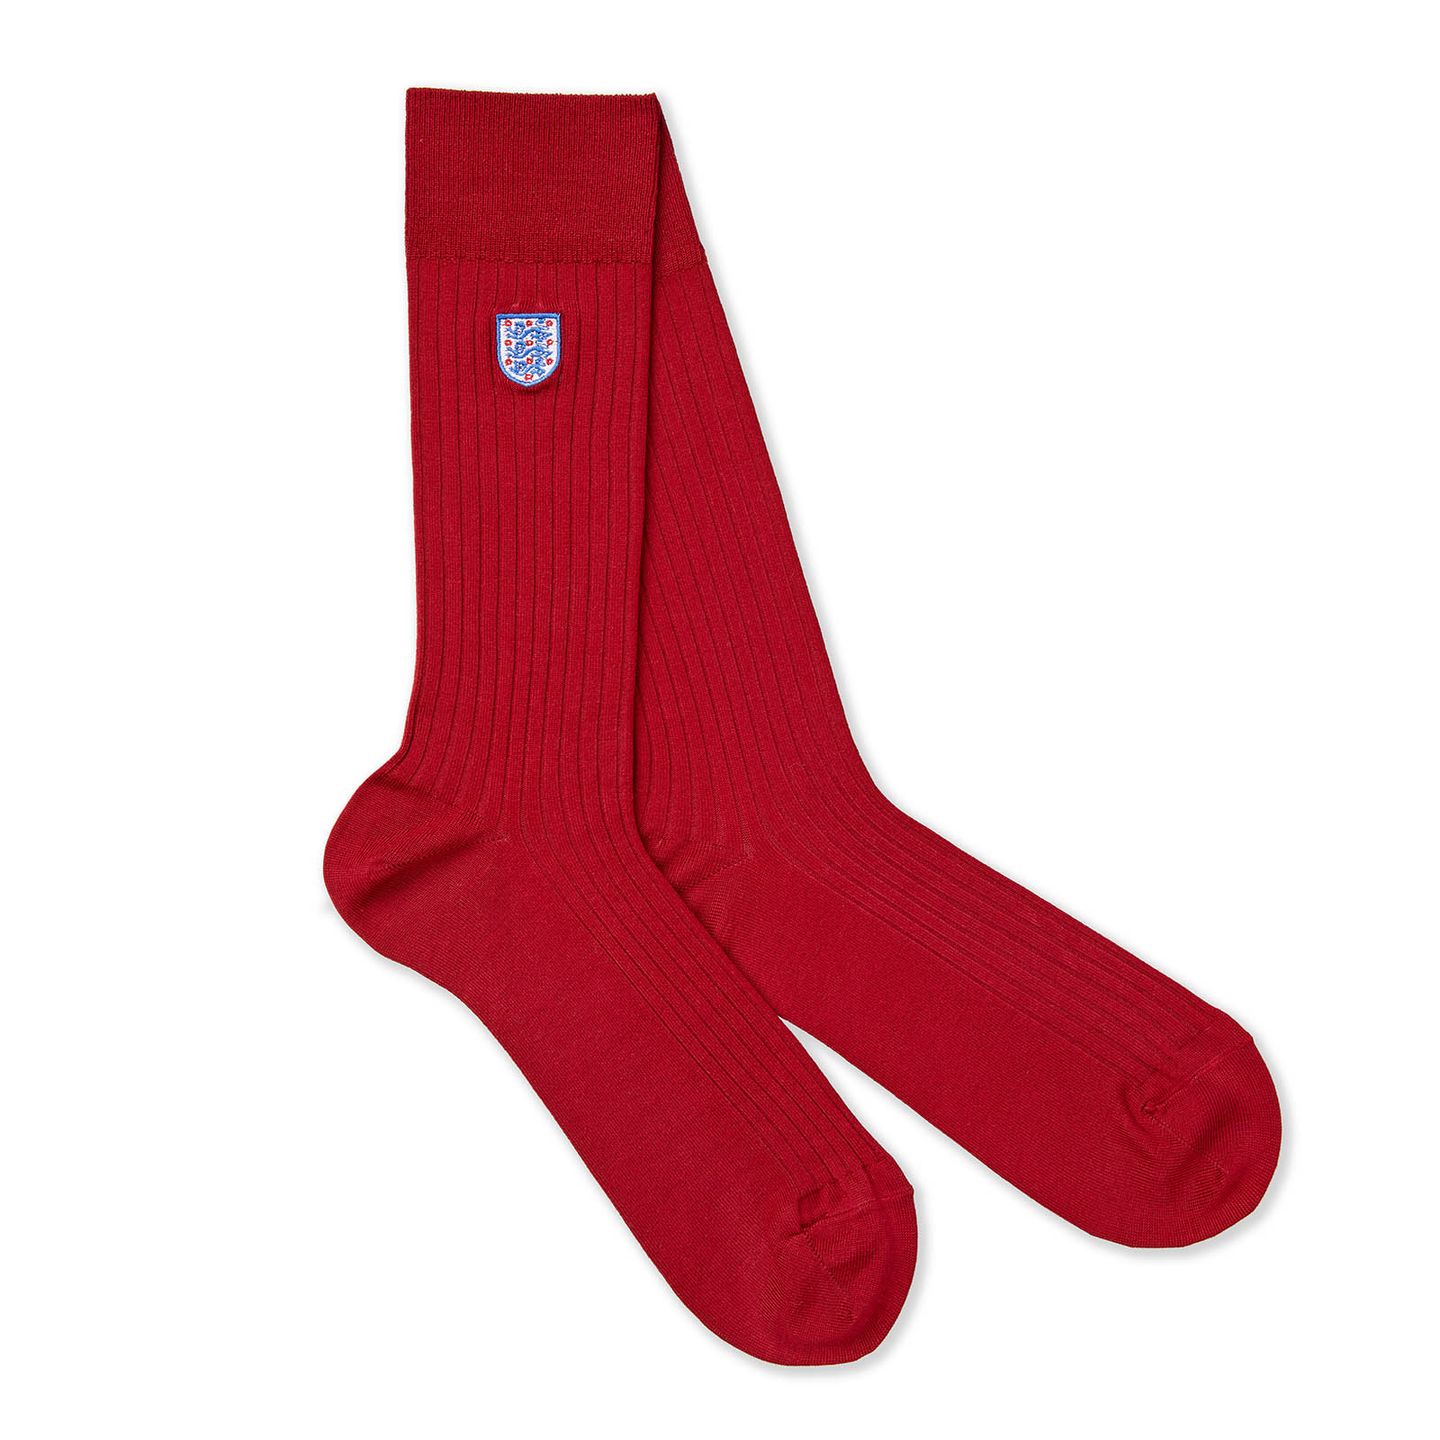 Pair of red lion socks, with the embroidered logo. Part of the Style Squad 3 Pair Box